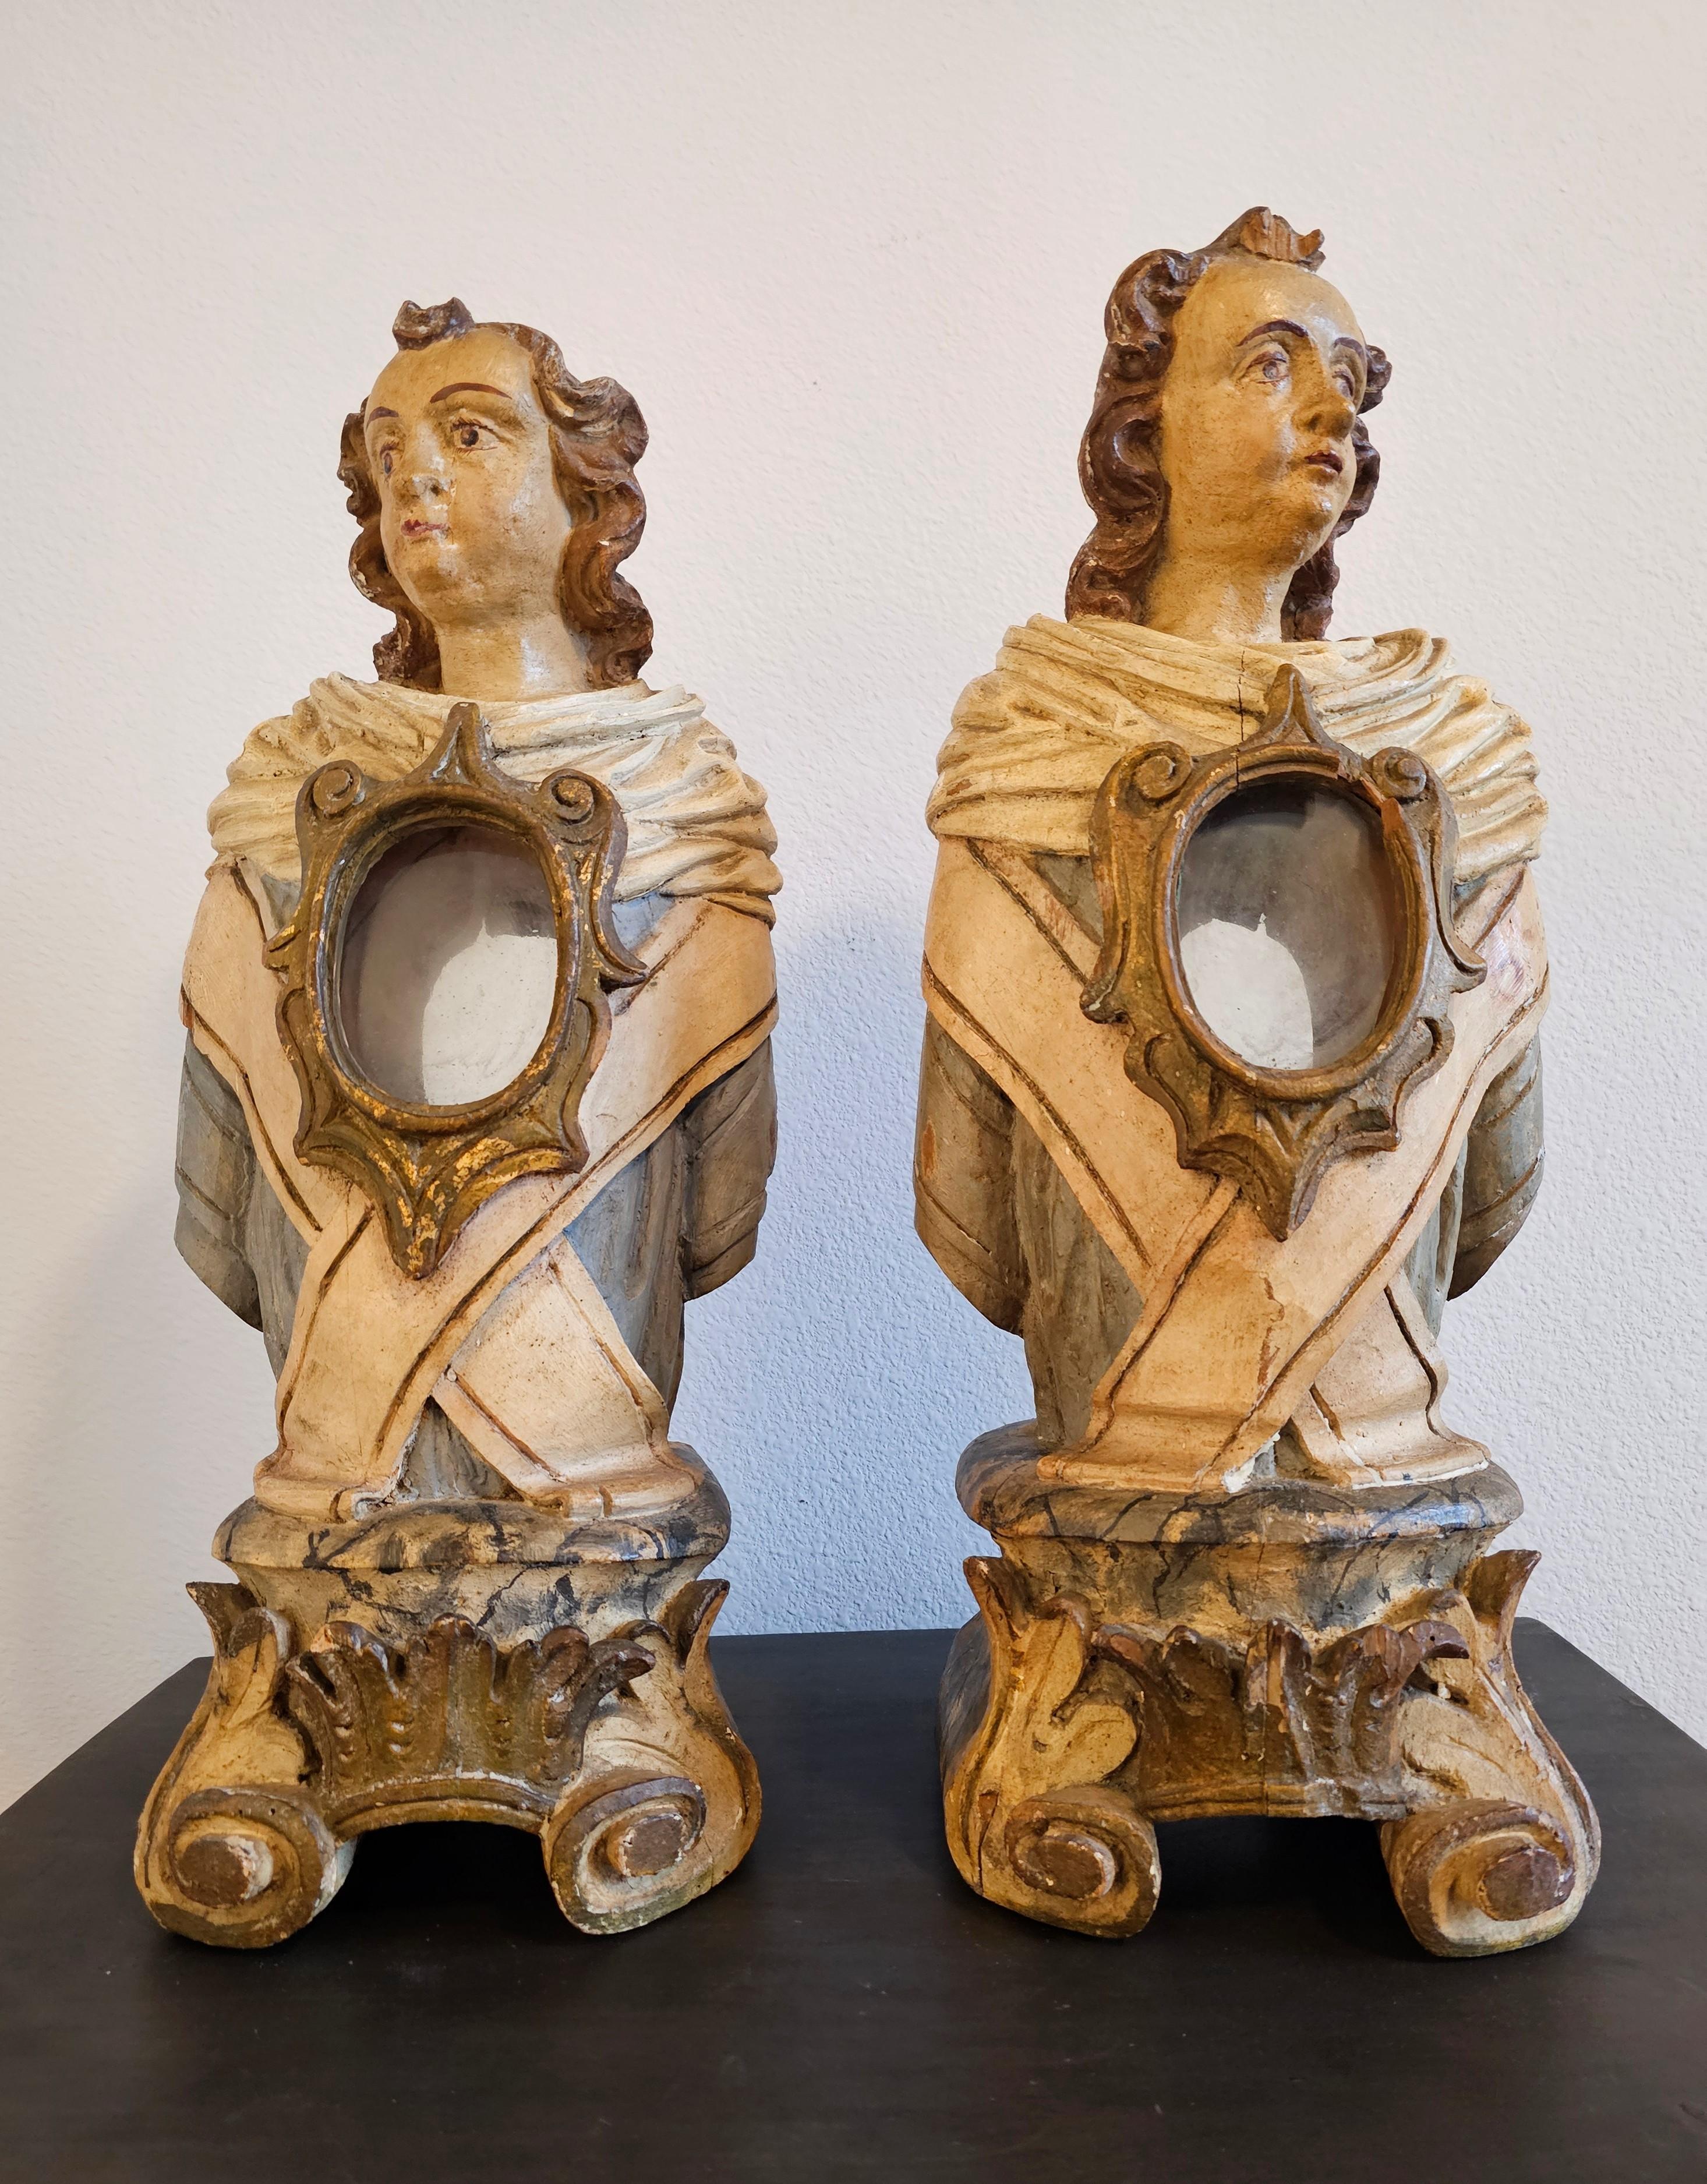 Hand-Carved 18th Century Italian Carved Painted Wood Reliquary Altar Figure Bust Pair For Sale